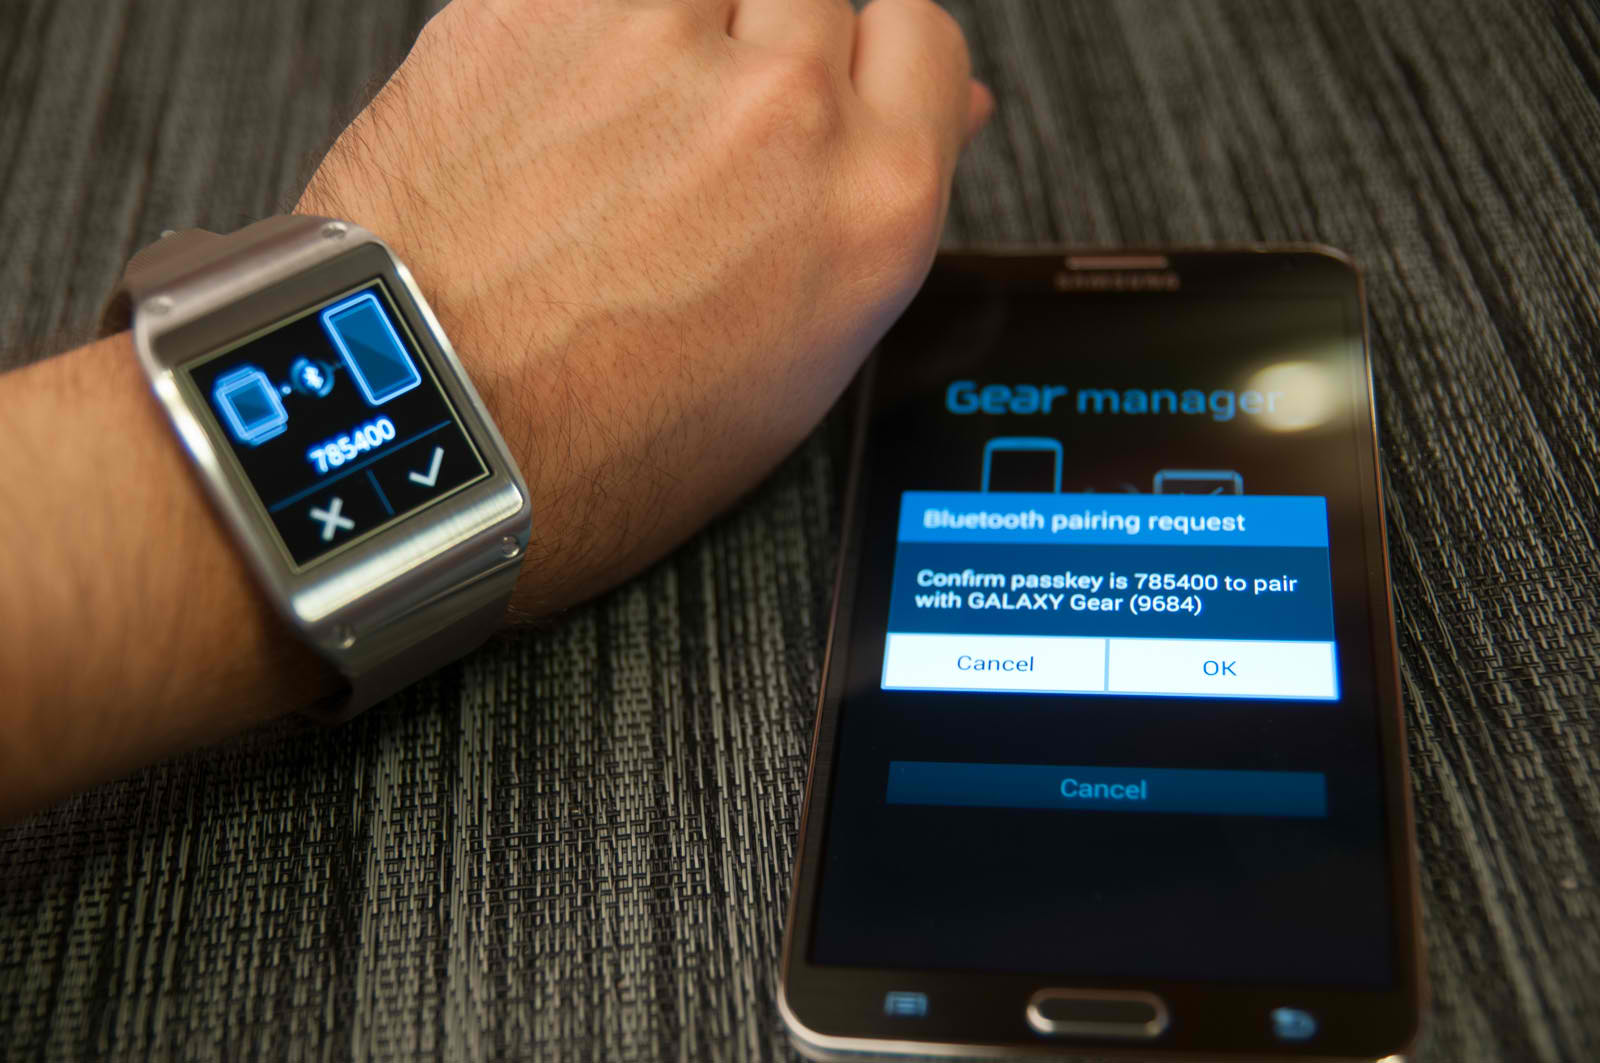 Now You Can Use The Samsung Galaxy Gear With Other Phones